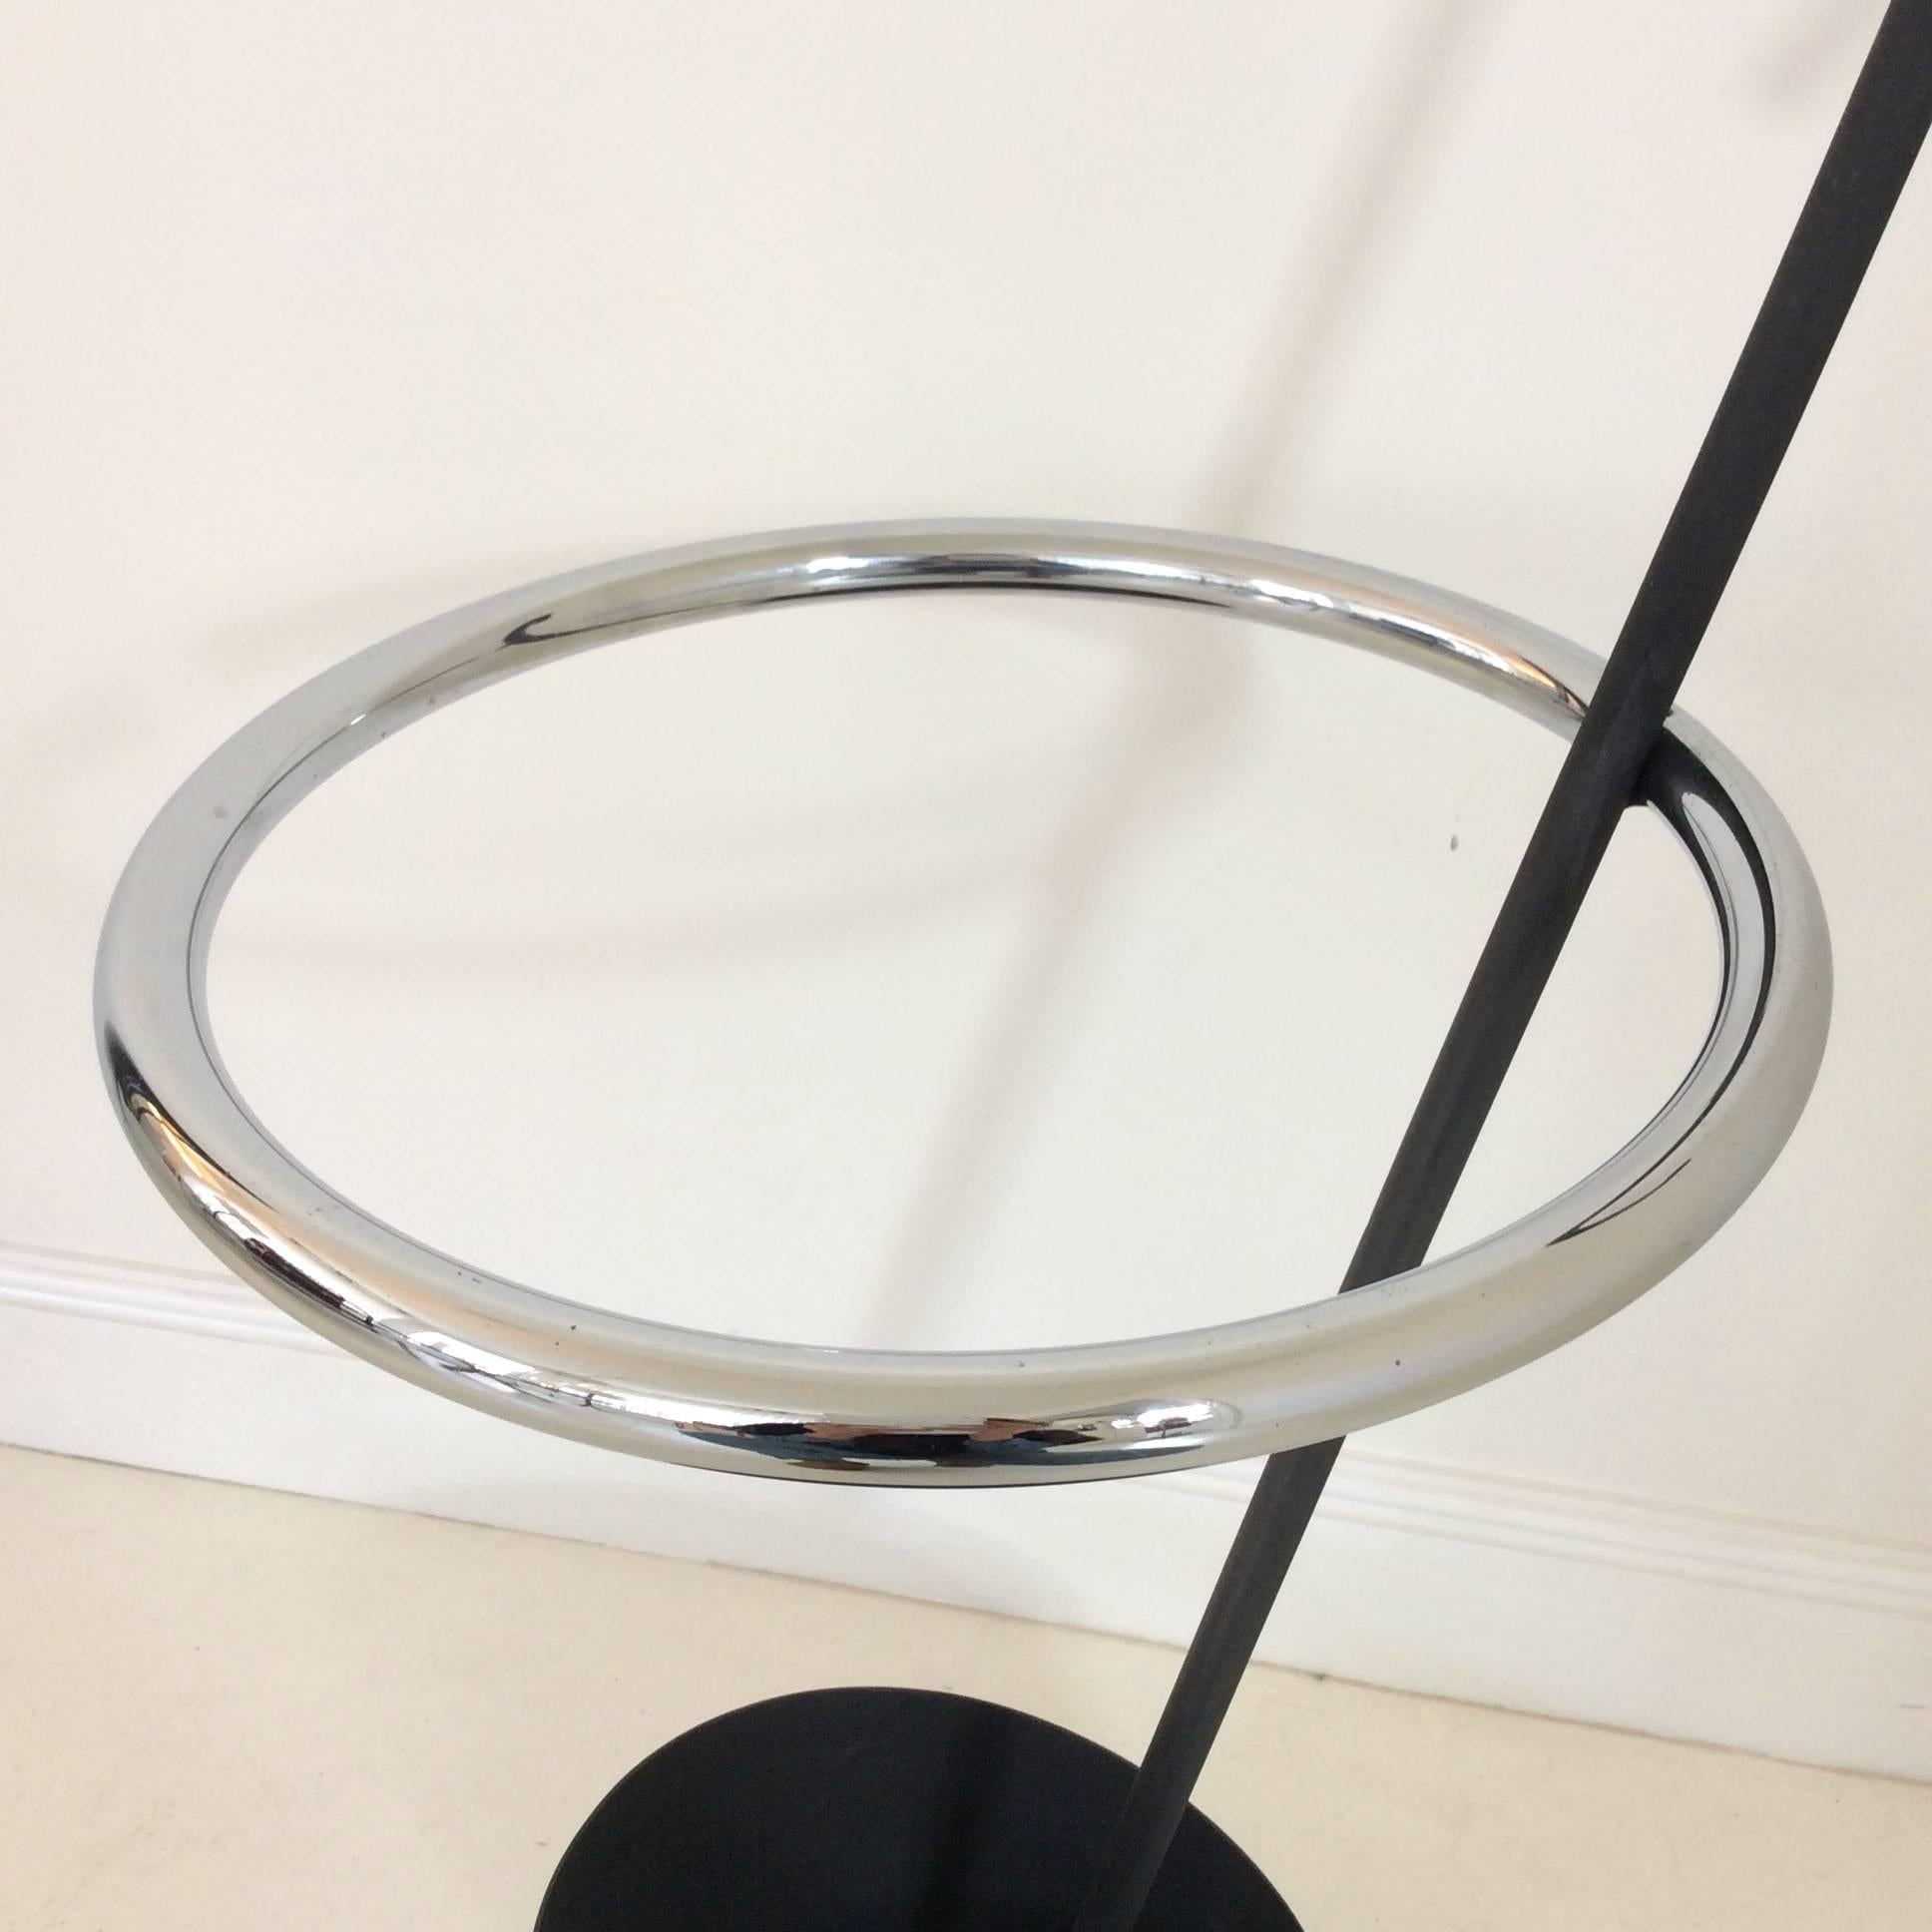 Shiro Kuramata umbrella stand designed in 1986 for Pastoe, Netherlands.
Small production.
Enameled steel, chrome-plated steel, rubber.
Dimensions: H 87 cm, W 48 cm, D 38 cm.
Good original condition.